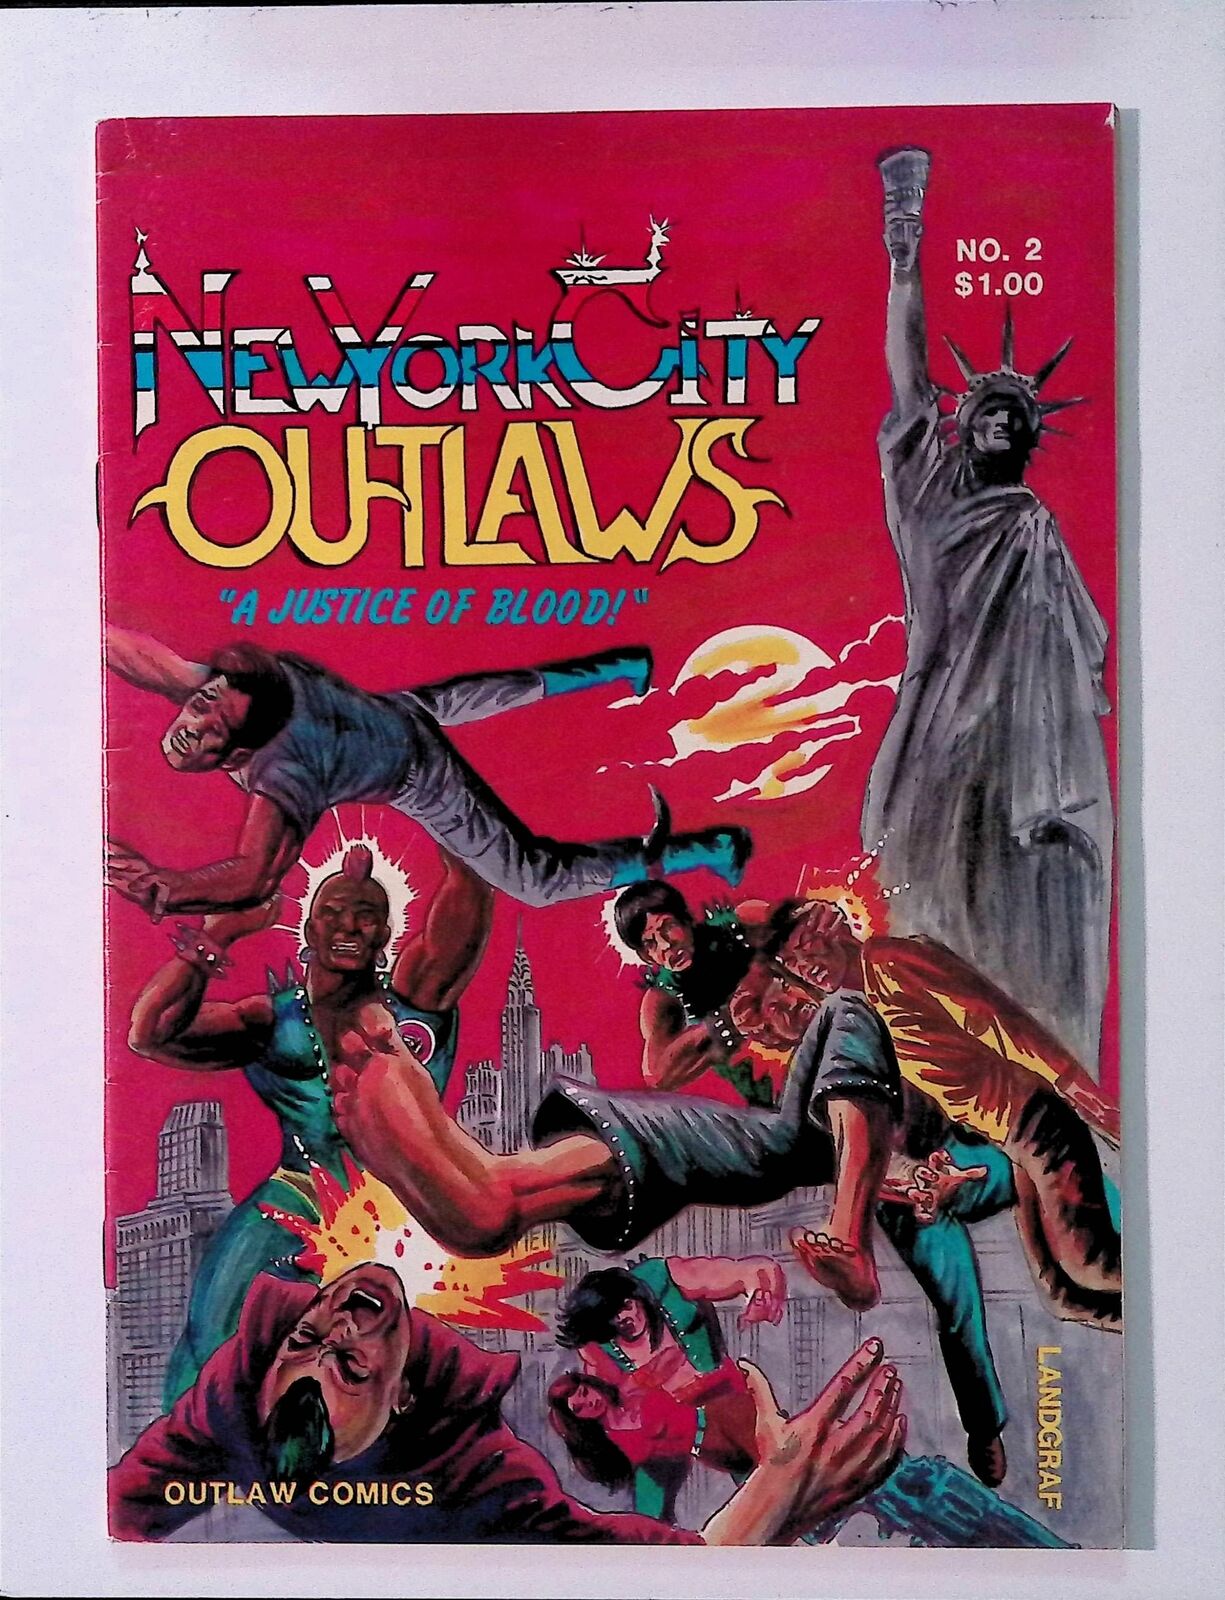 New York City Outlaws “A Justice Of Blood” (1985) #2 VG Outlaw Comics Book